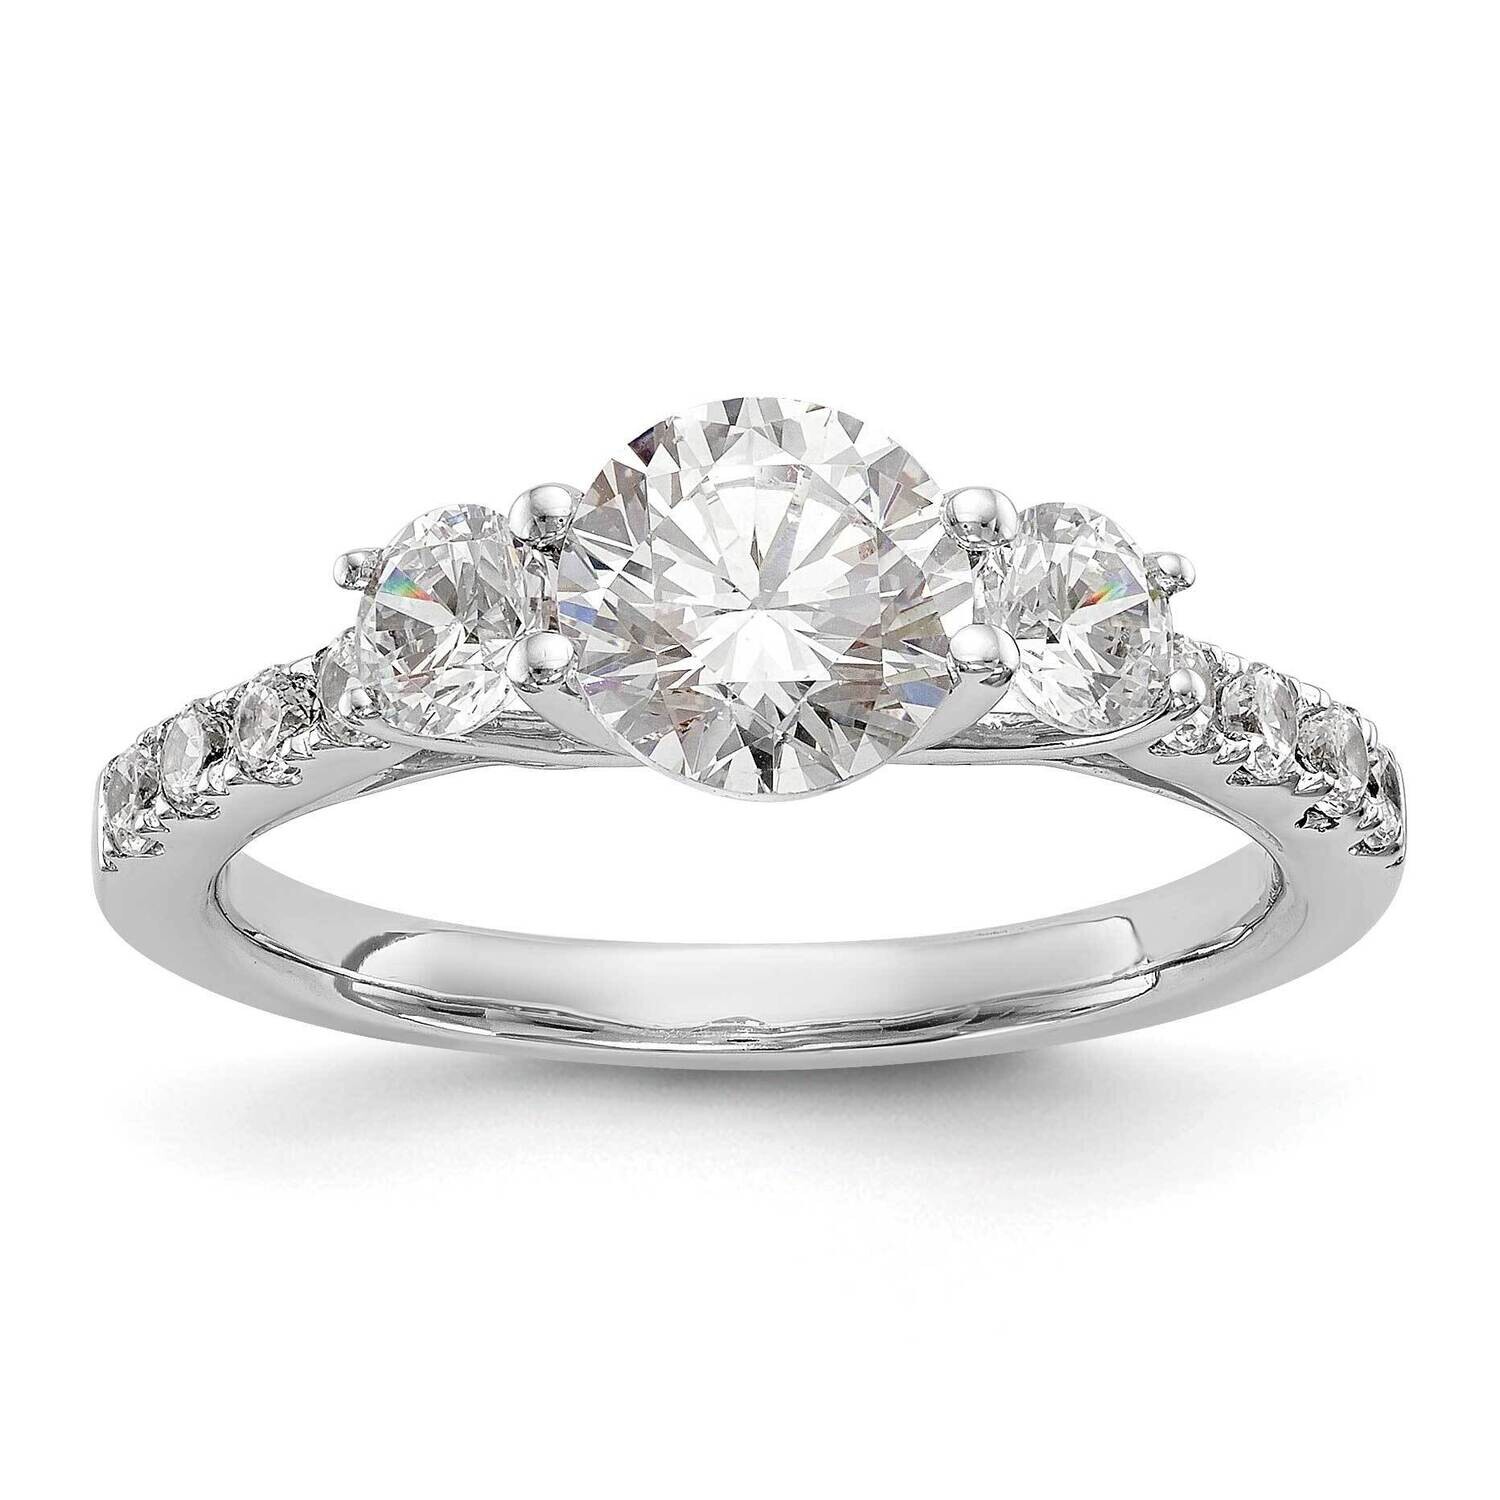 3-Stone Holds 1 Carat 6.5mm Round Center 2-3.8mm Round Sides Engagement Ring Mounting 14k White Gold RM2971E-100-CWAA